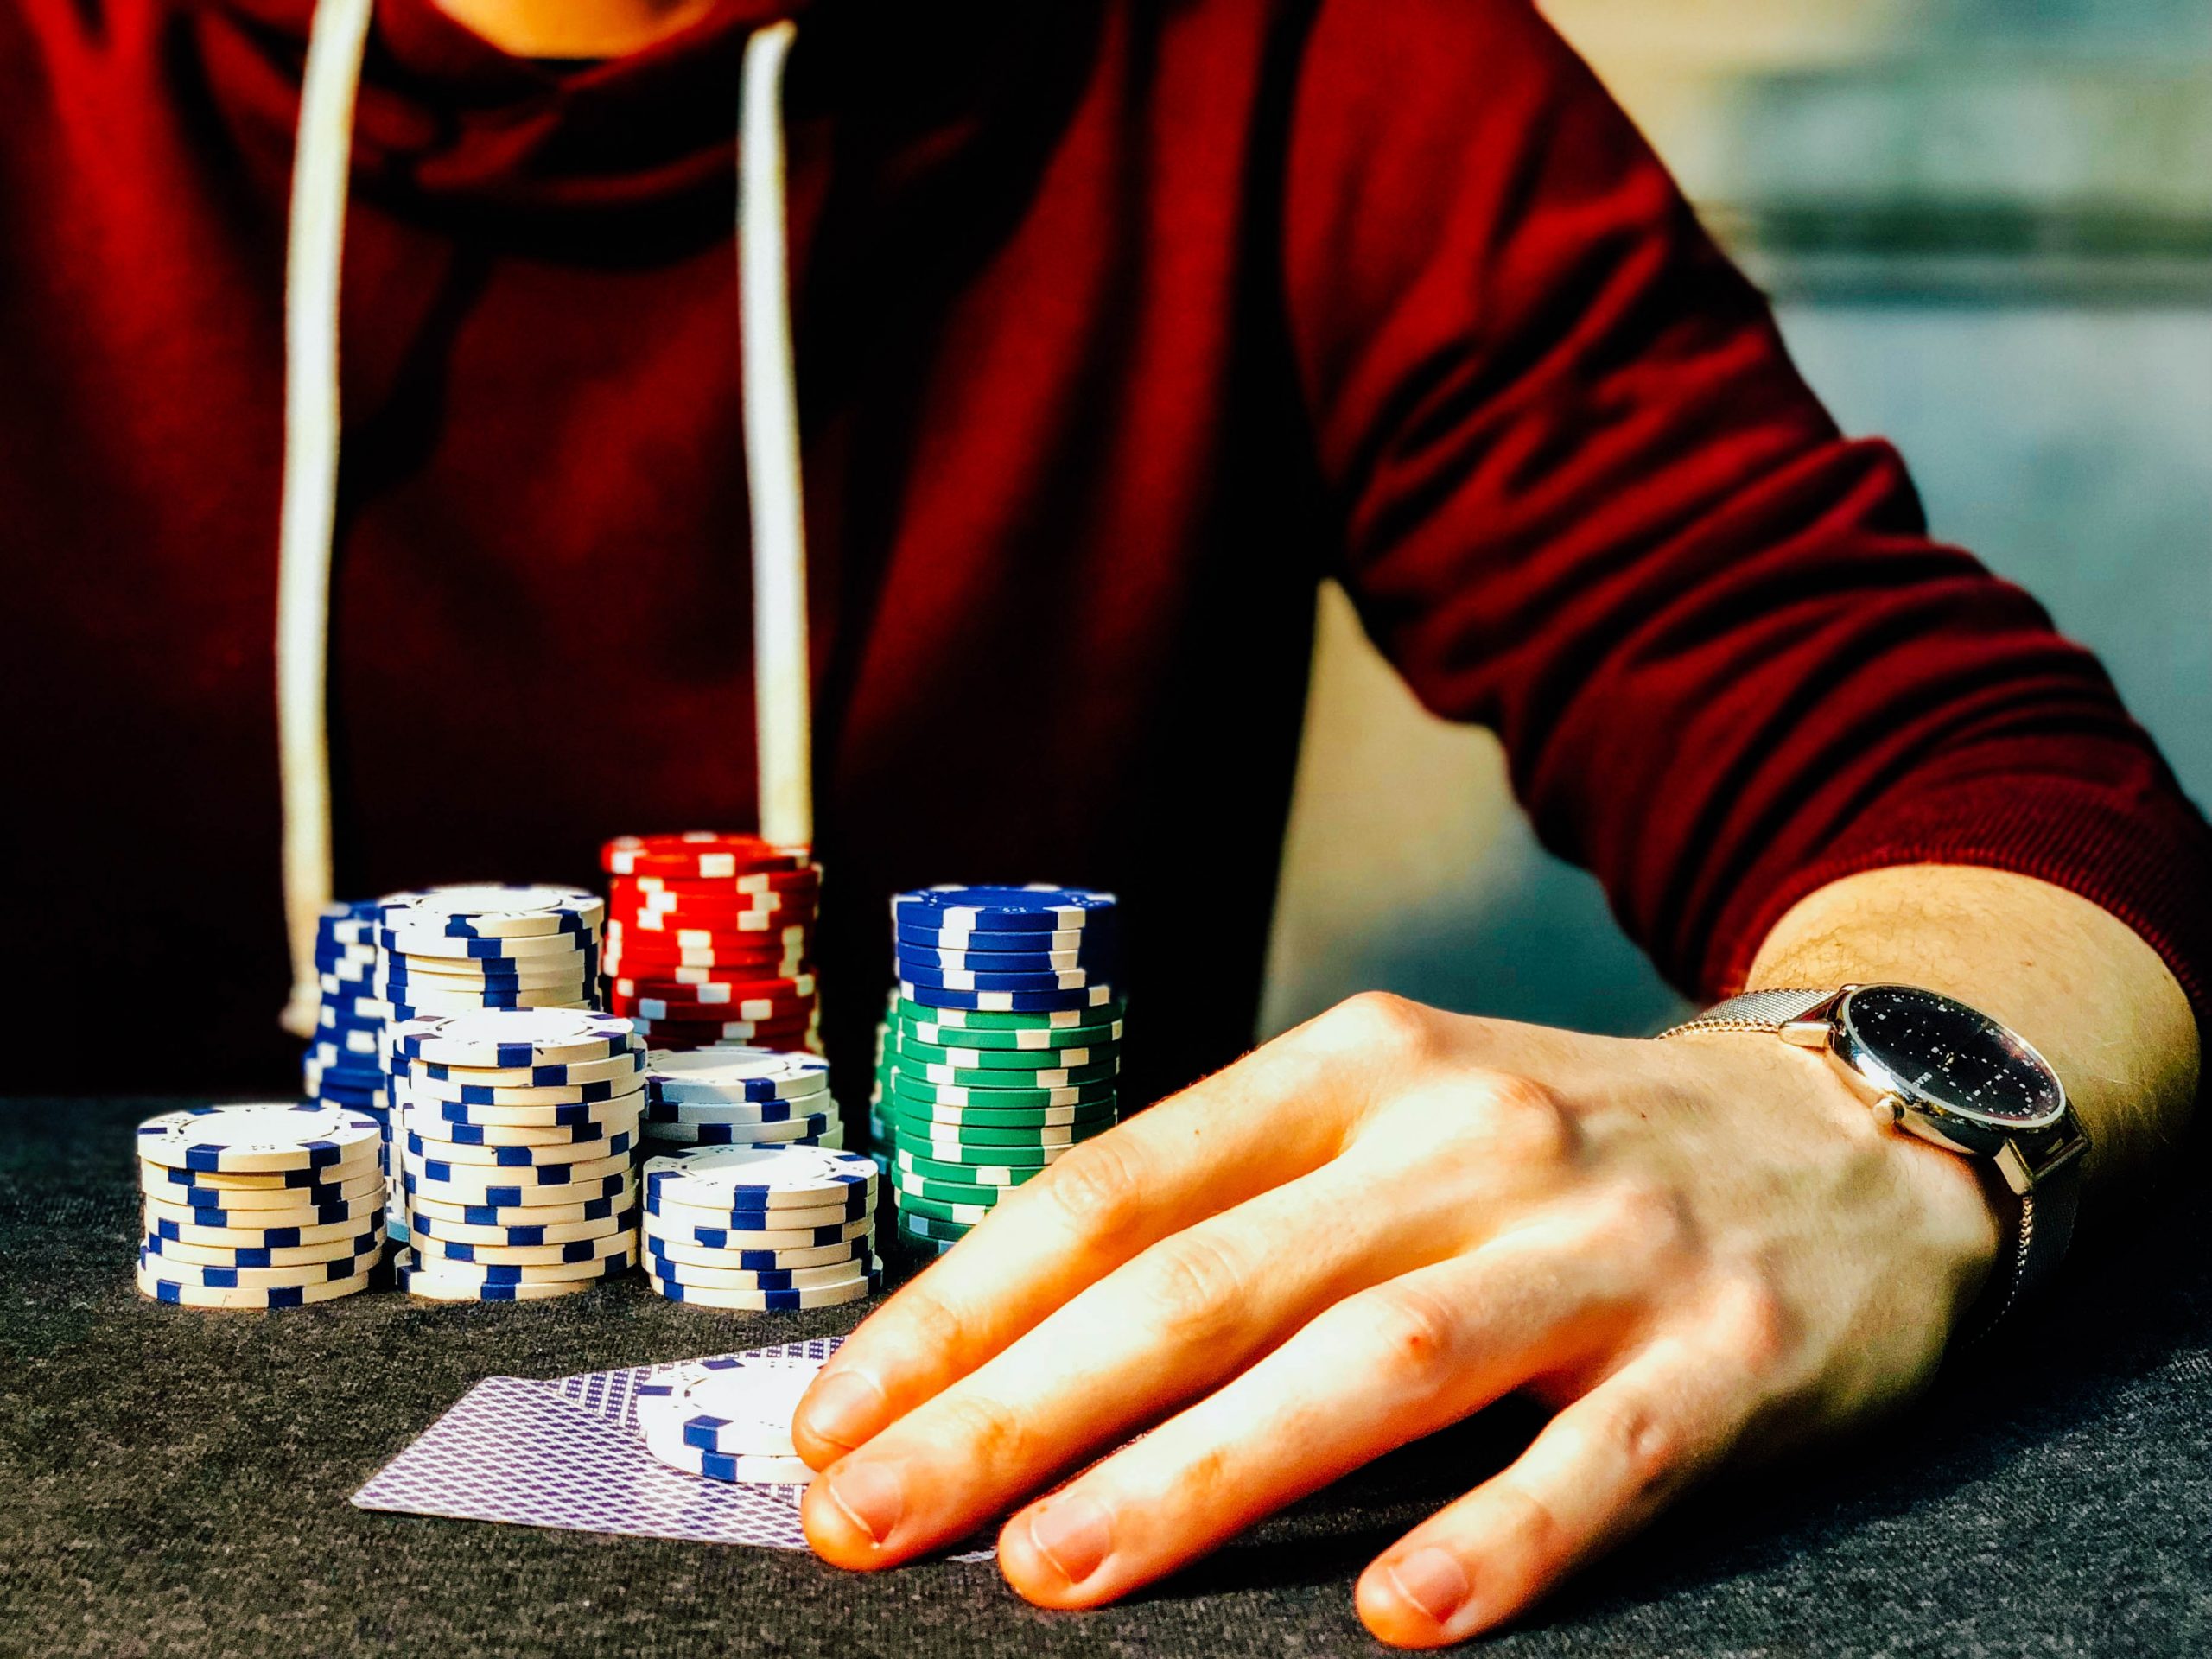 in article about NeonVegas, a person with casino chips and cards in front of them